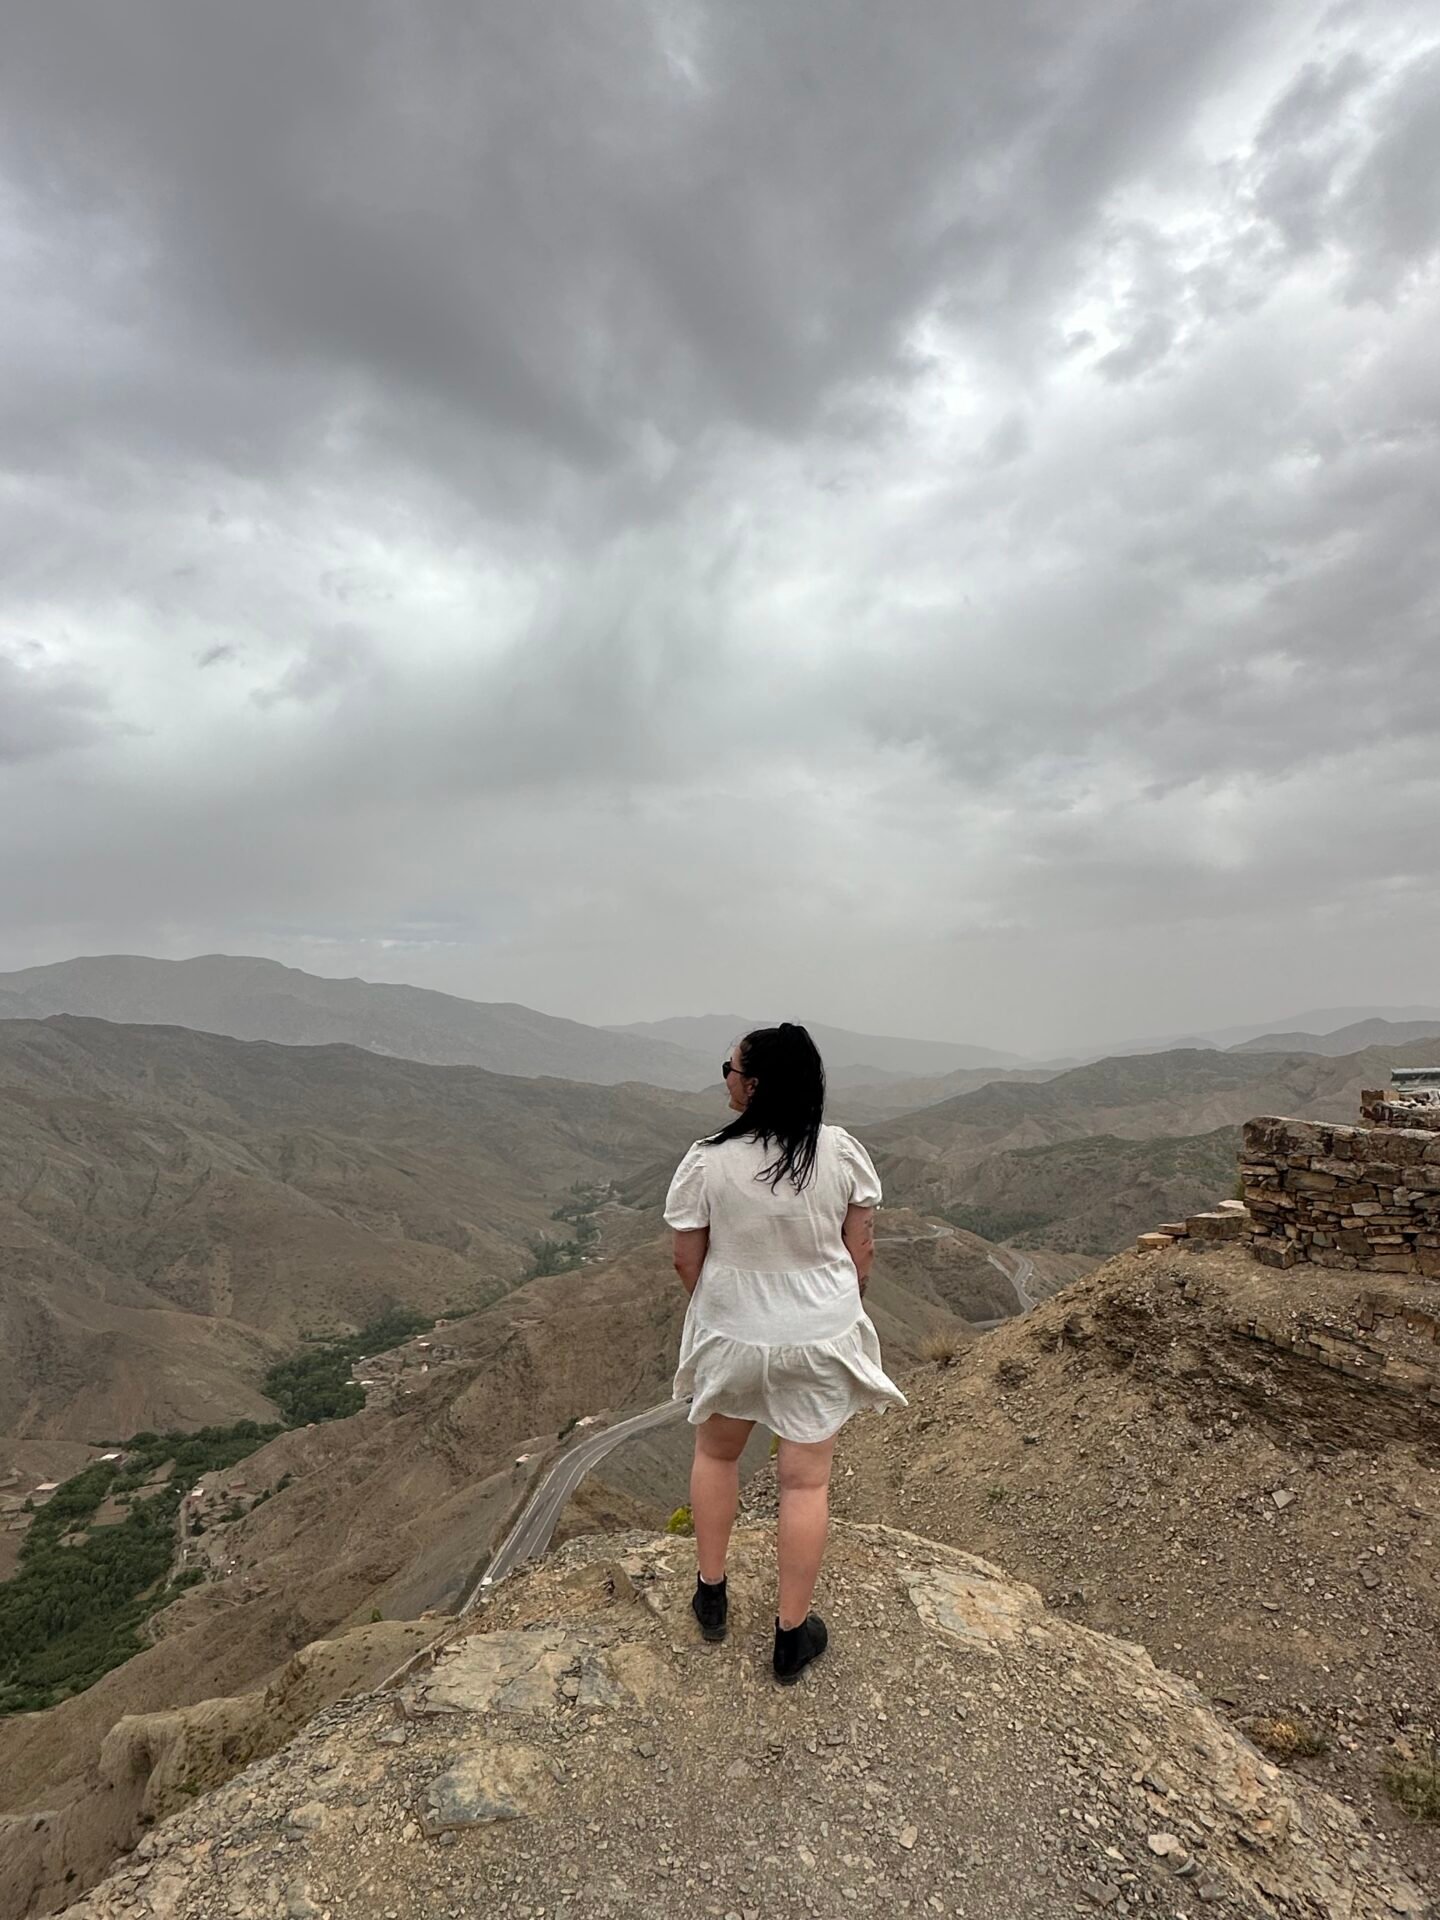 Taking in the captivating vista of Morocco, the landscape unfolds before me, a harmonious blend of mountains, valleys, and distant horizons. The scene captures the essence of exploration and appreciation for the diverse beauty of this North African gem.